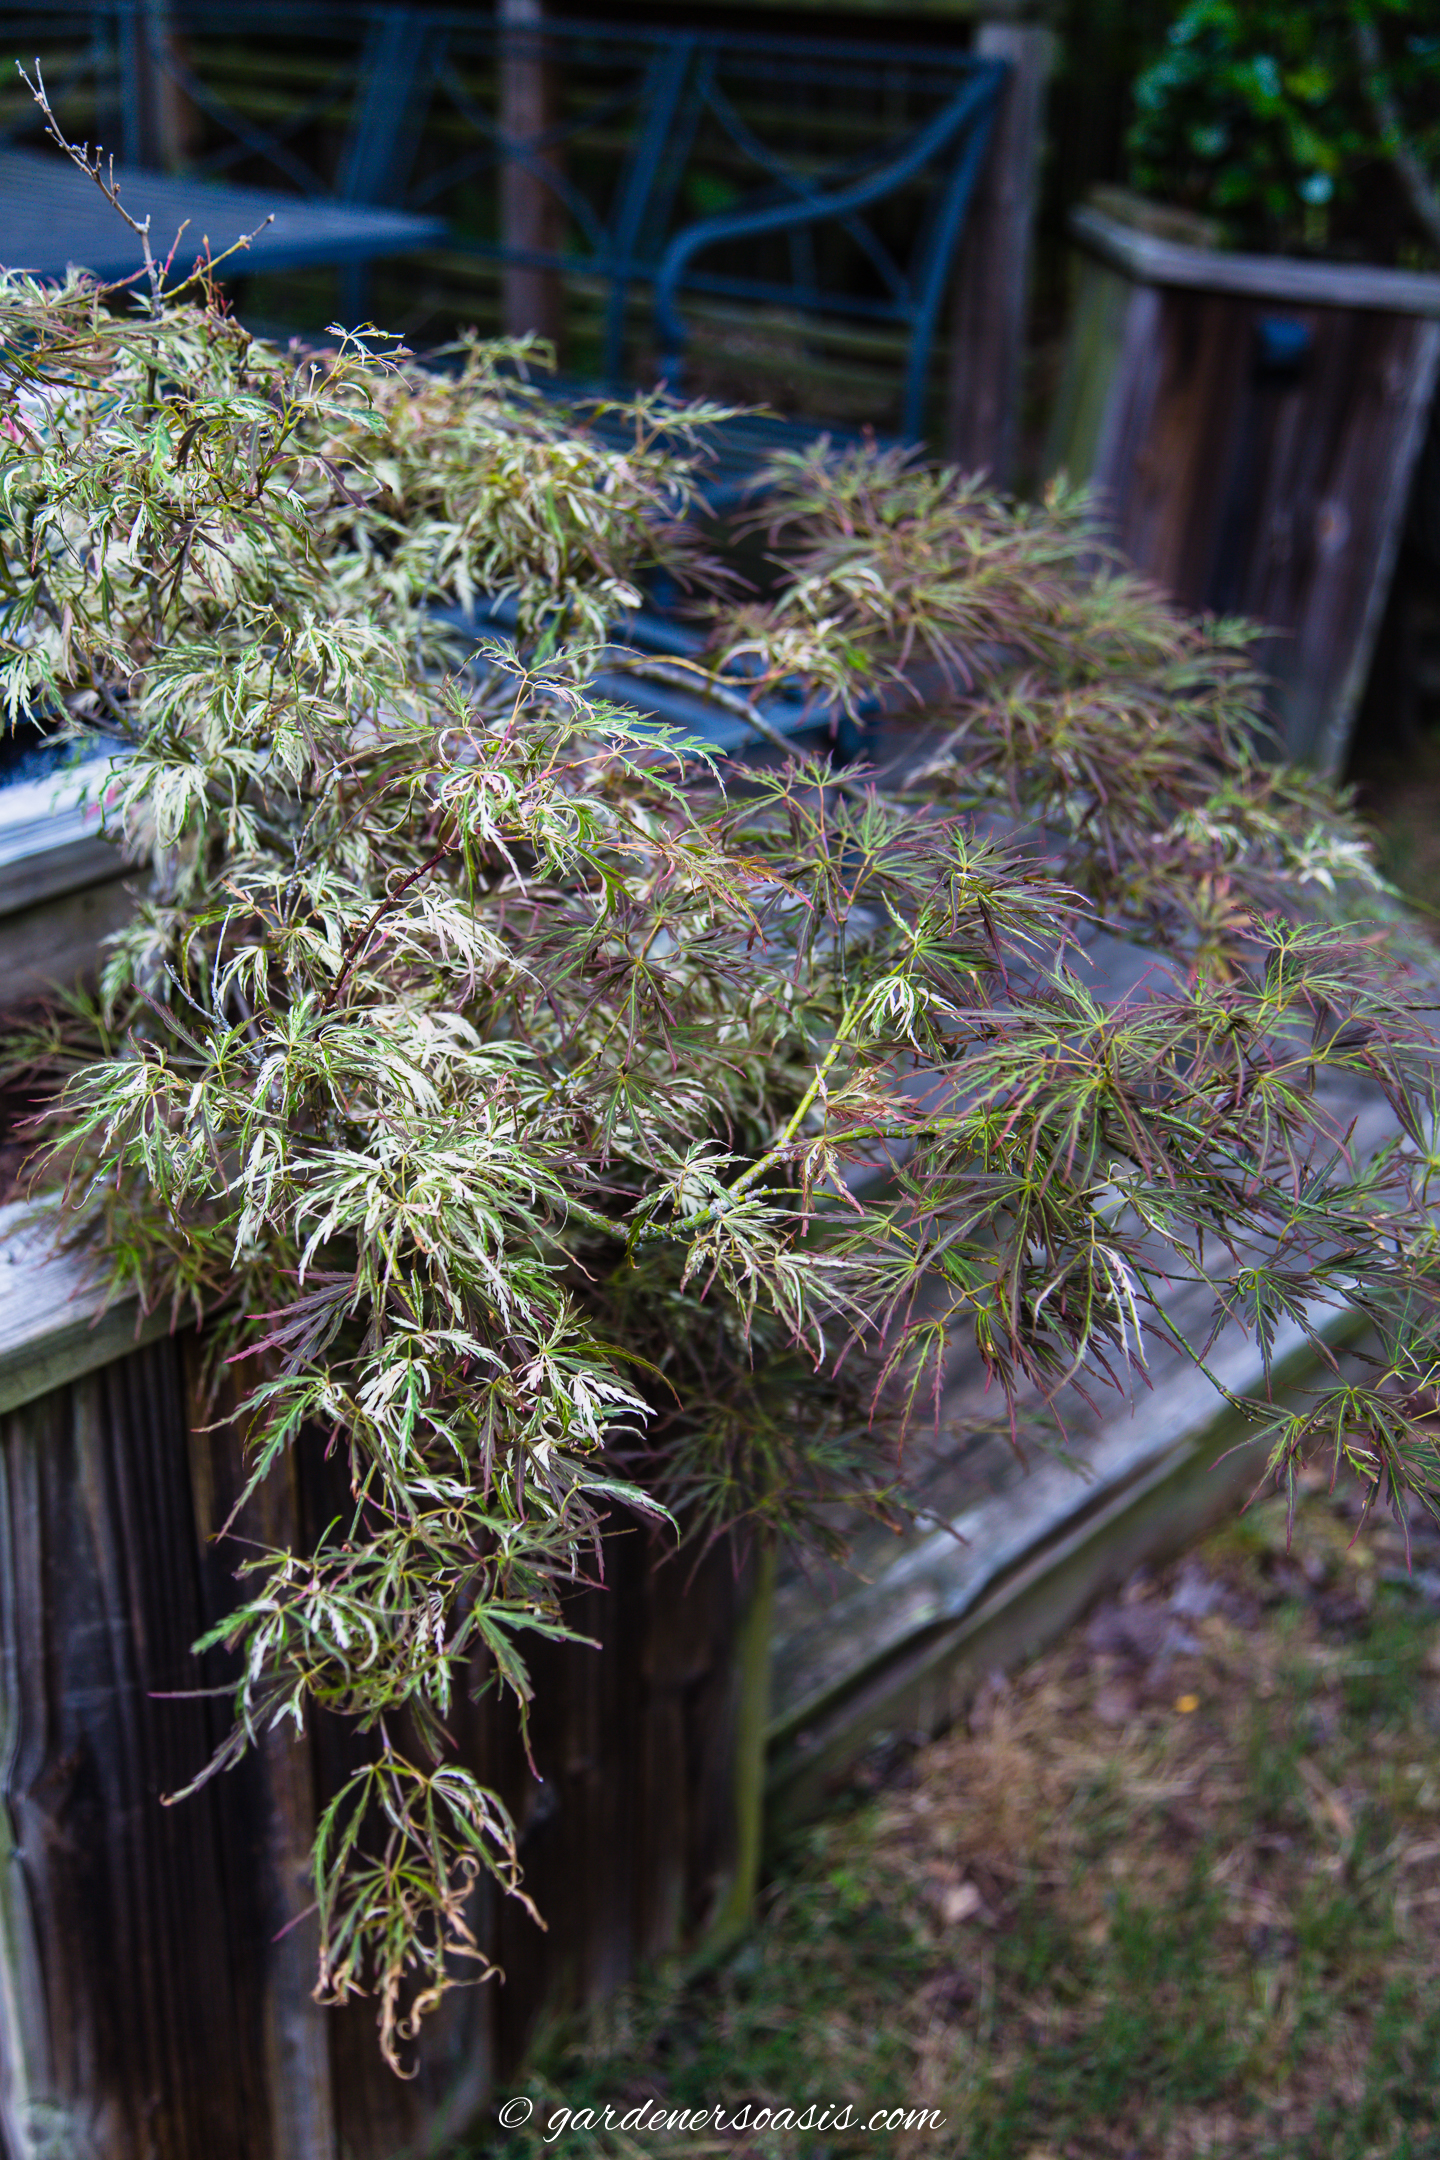 Japanese Maples grow well in small containers | 10 Surprising Things About Growing Beautiful Japanese Maples | If you want to add a Japanese Maple to your landscape (or you already have one growing in your garden) but aren't sure how to care for it, these tips on fertilizing, pruning and growing in containers (among other things) are very helpful!